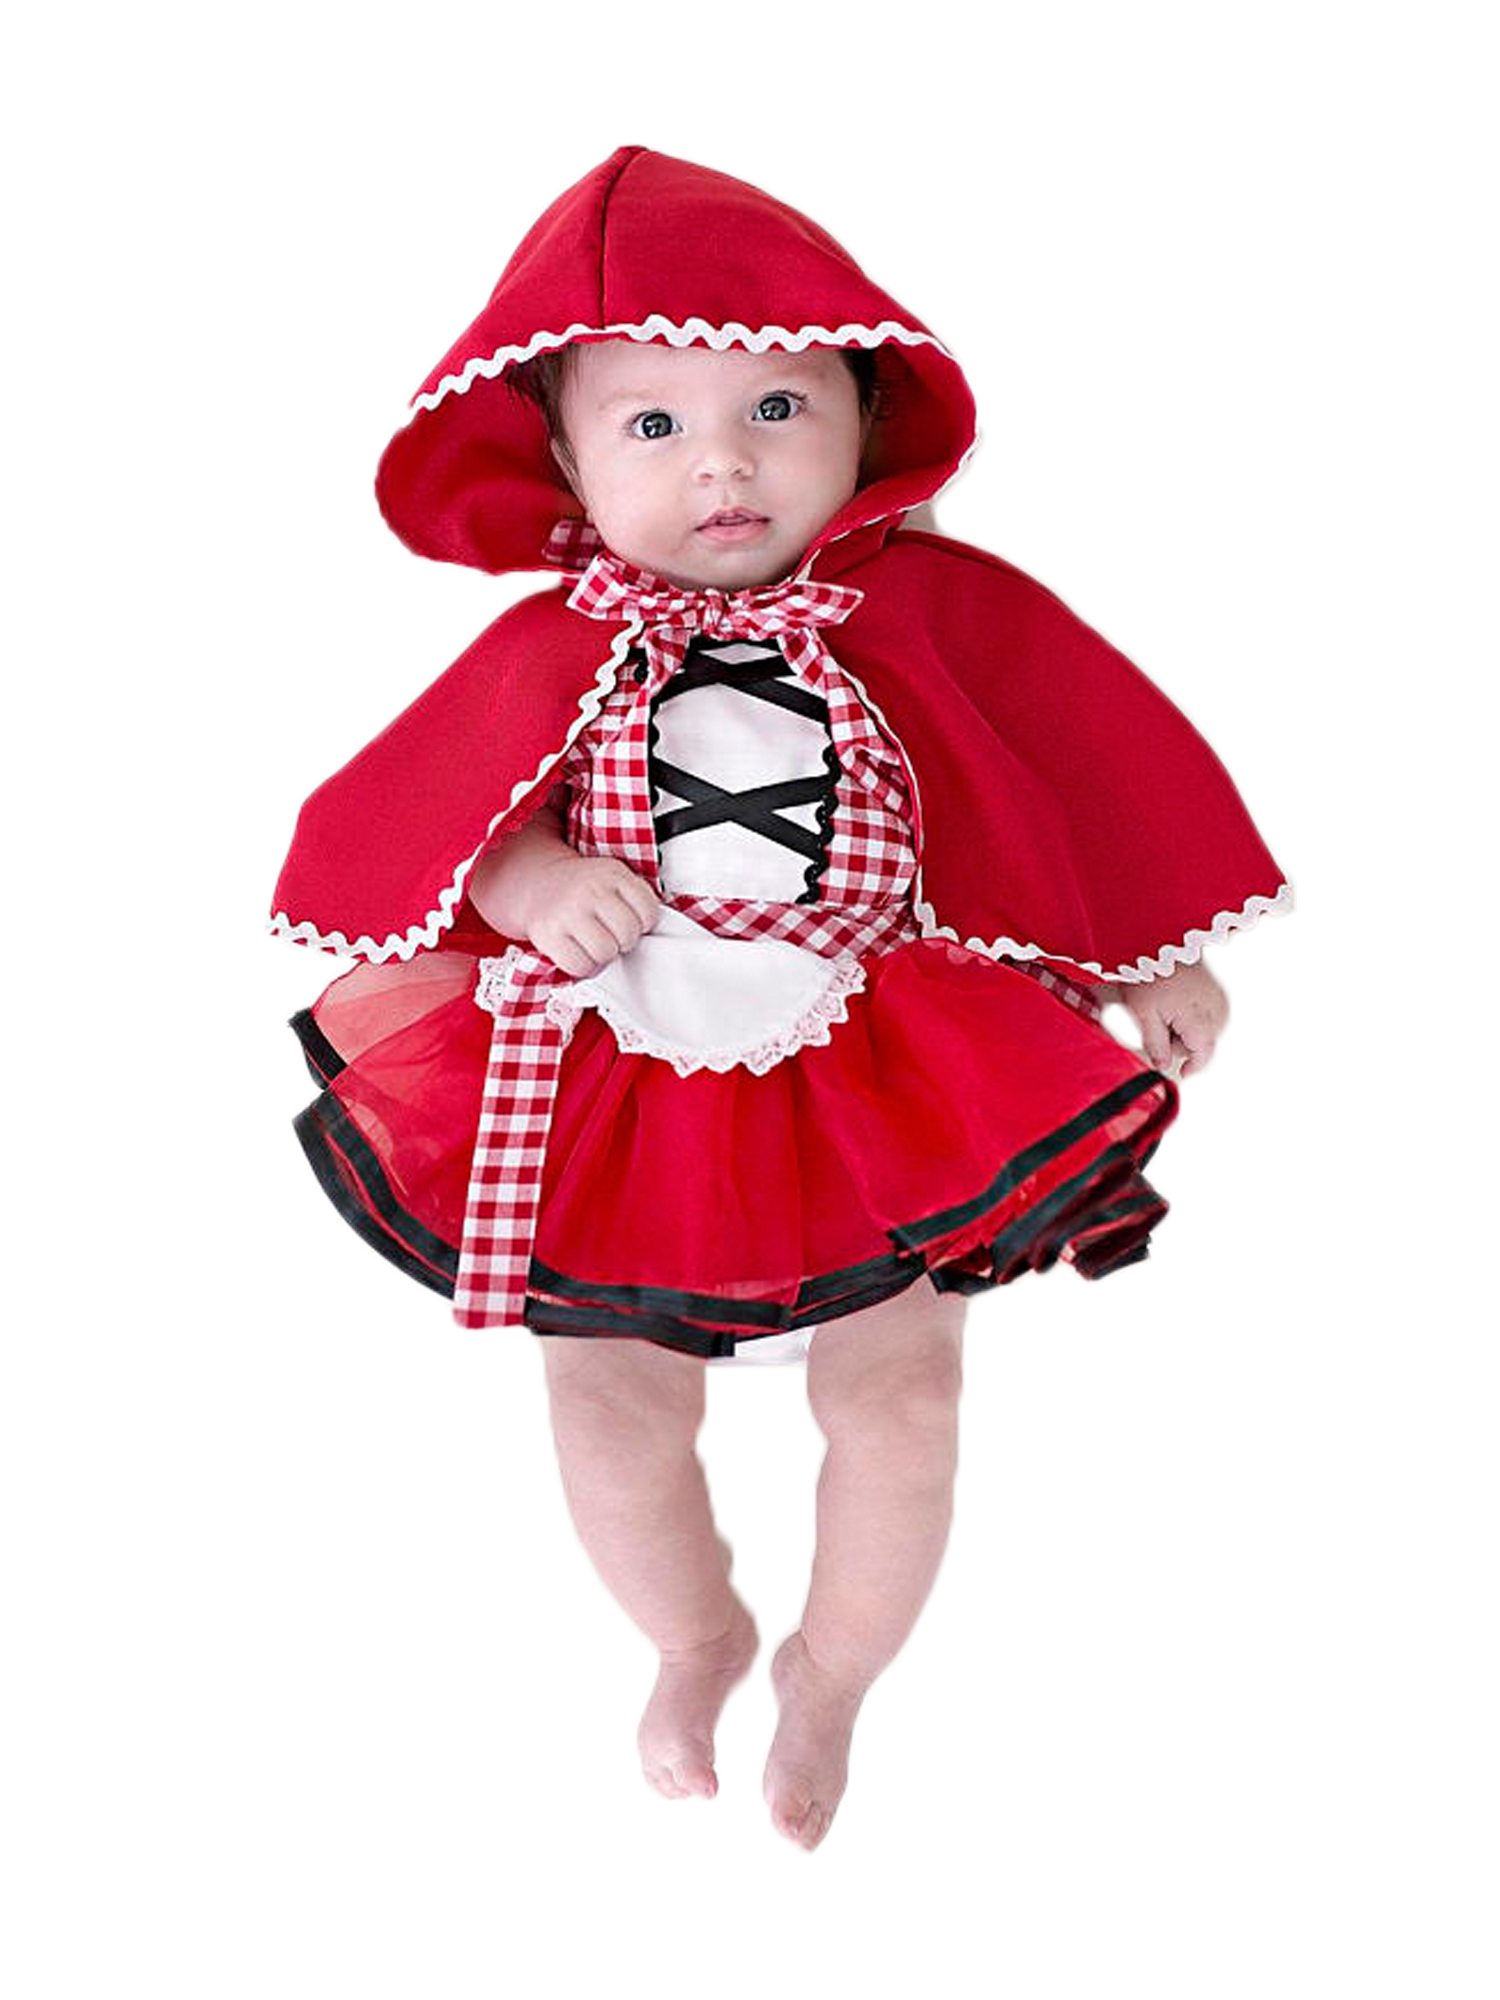 Eyicmarn Cosplay Little Red Riding Hood Garment for Babies with Cape - image 1 of 6